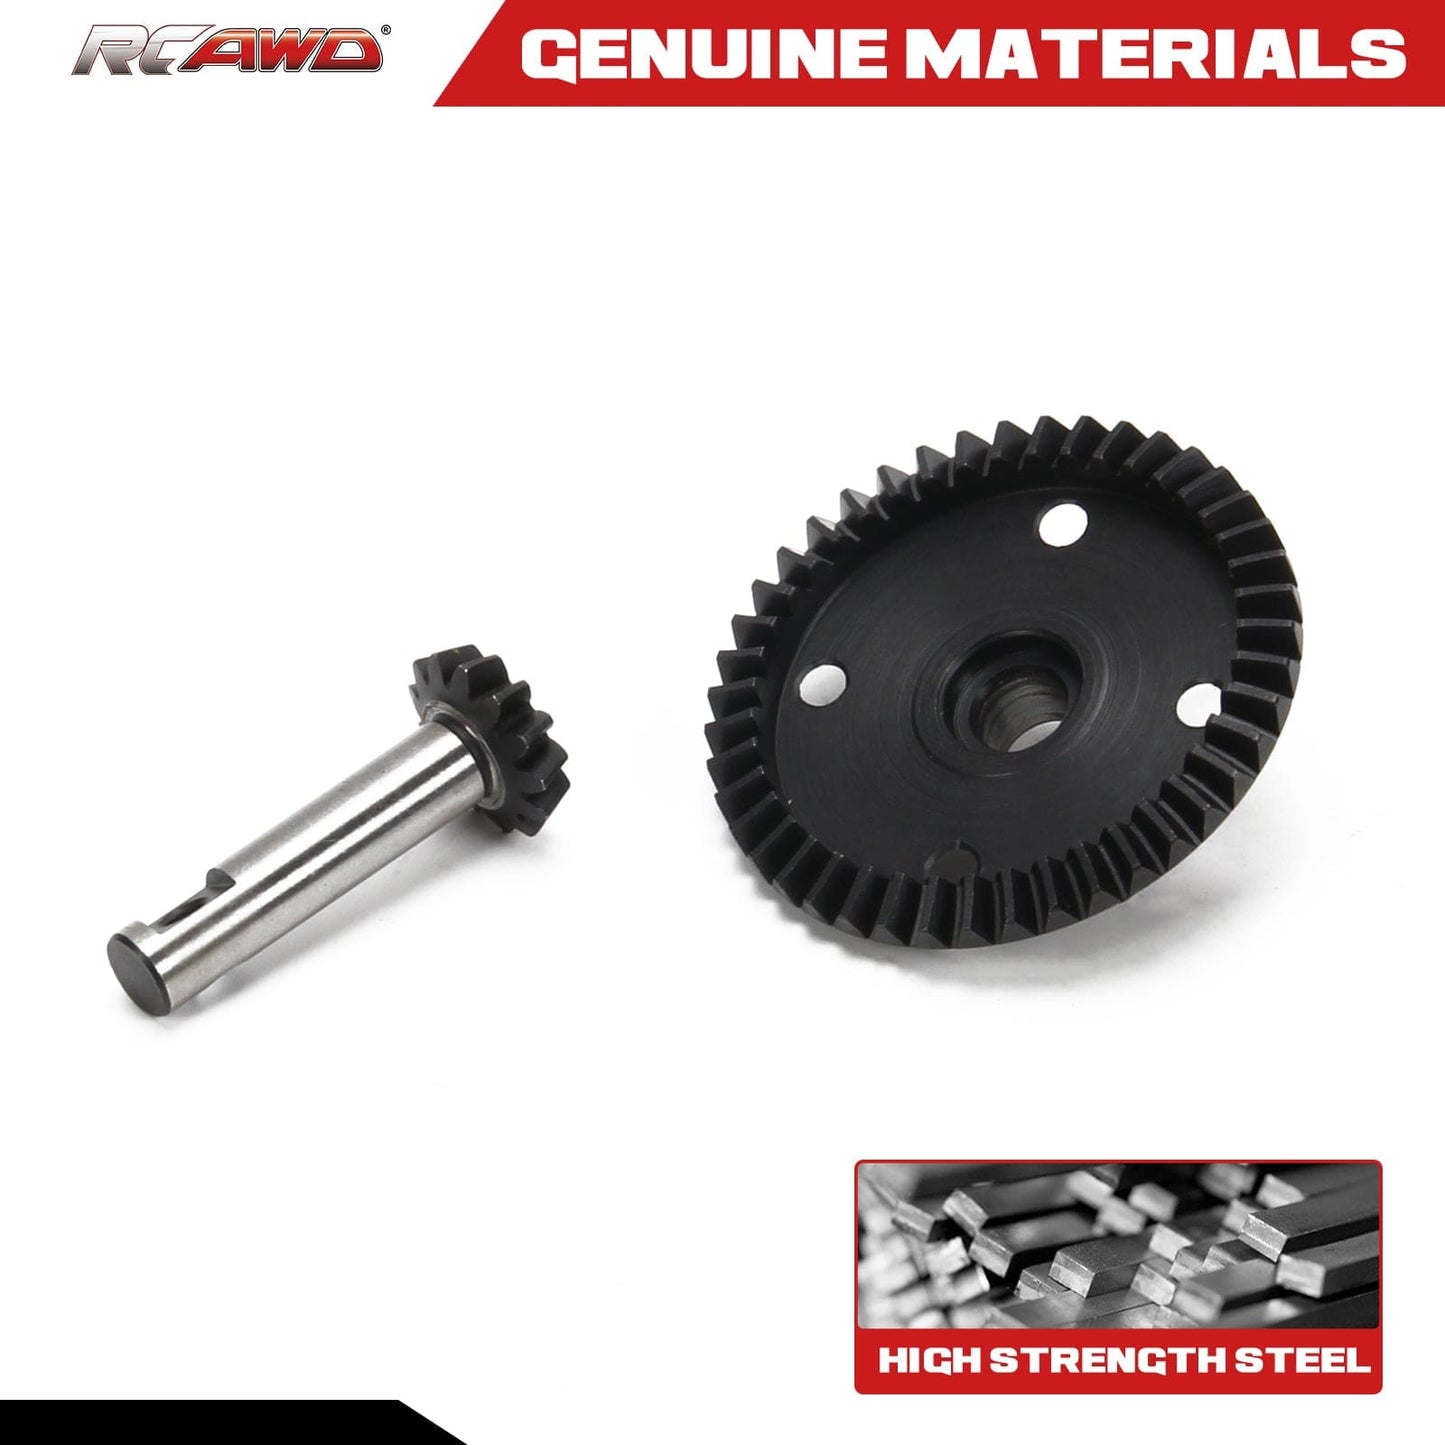 RCAWD Losi LMT upgrade parts Super heavy duty gear set 40crmo F/R 13T Differential Pinion gear diff gear and Diff Ring Gear 43TLOS242042 LOS242040 - RCAWD